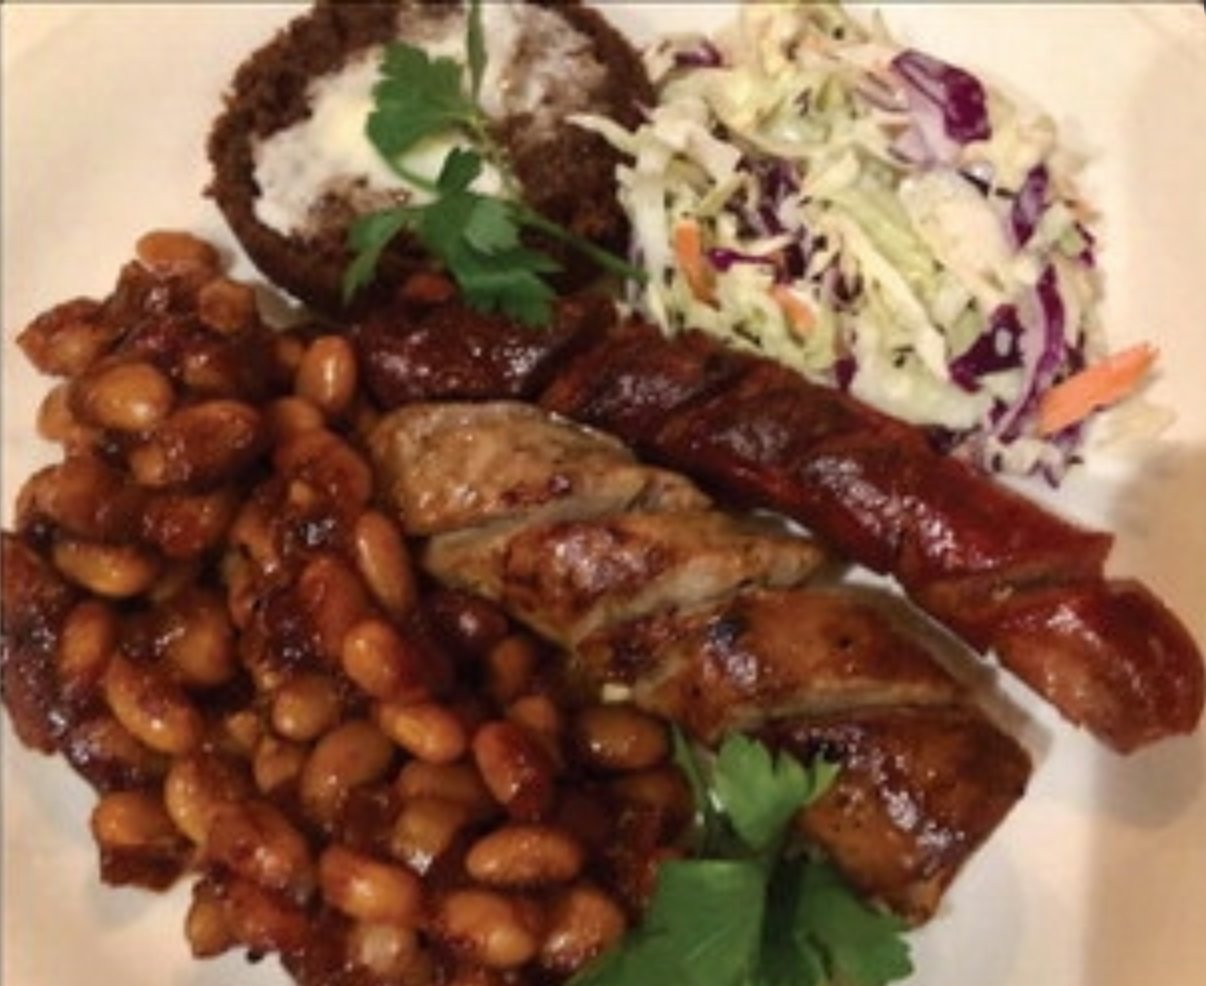 There’s no better way to take the chill off a cold winter day than with a plate of bourbon baked beans with grilled and spiralized sausages and hot dogs, with a side of cole slaw.